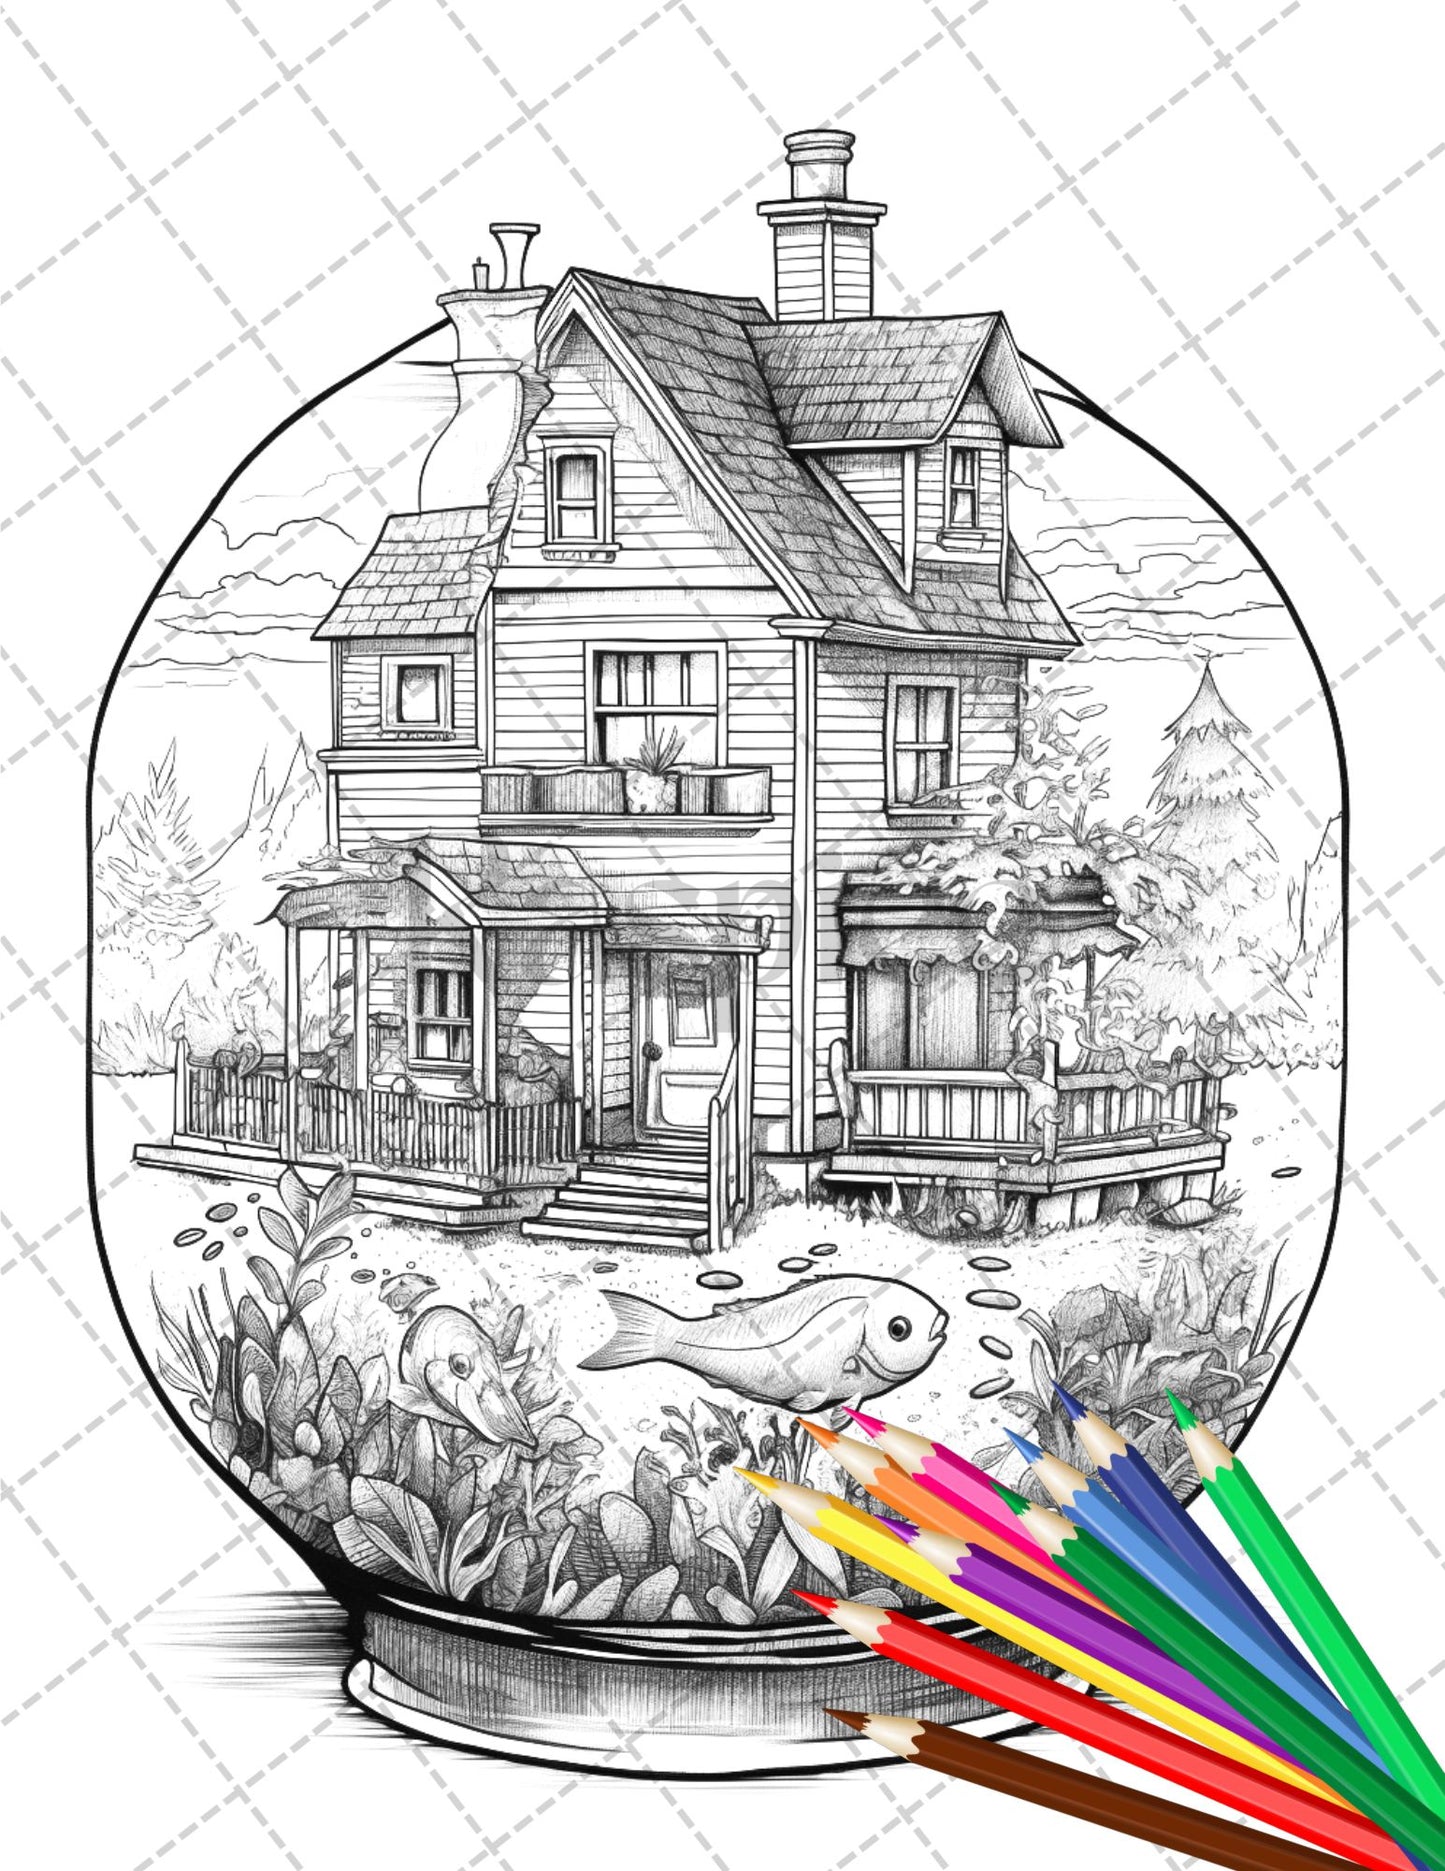 34 Fishtank Houses Coloring Book for Adults, Grayscale Coloring Page, Printable PDF Instant Download - raspiee